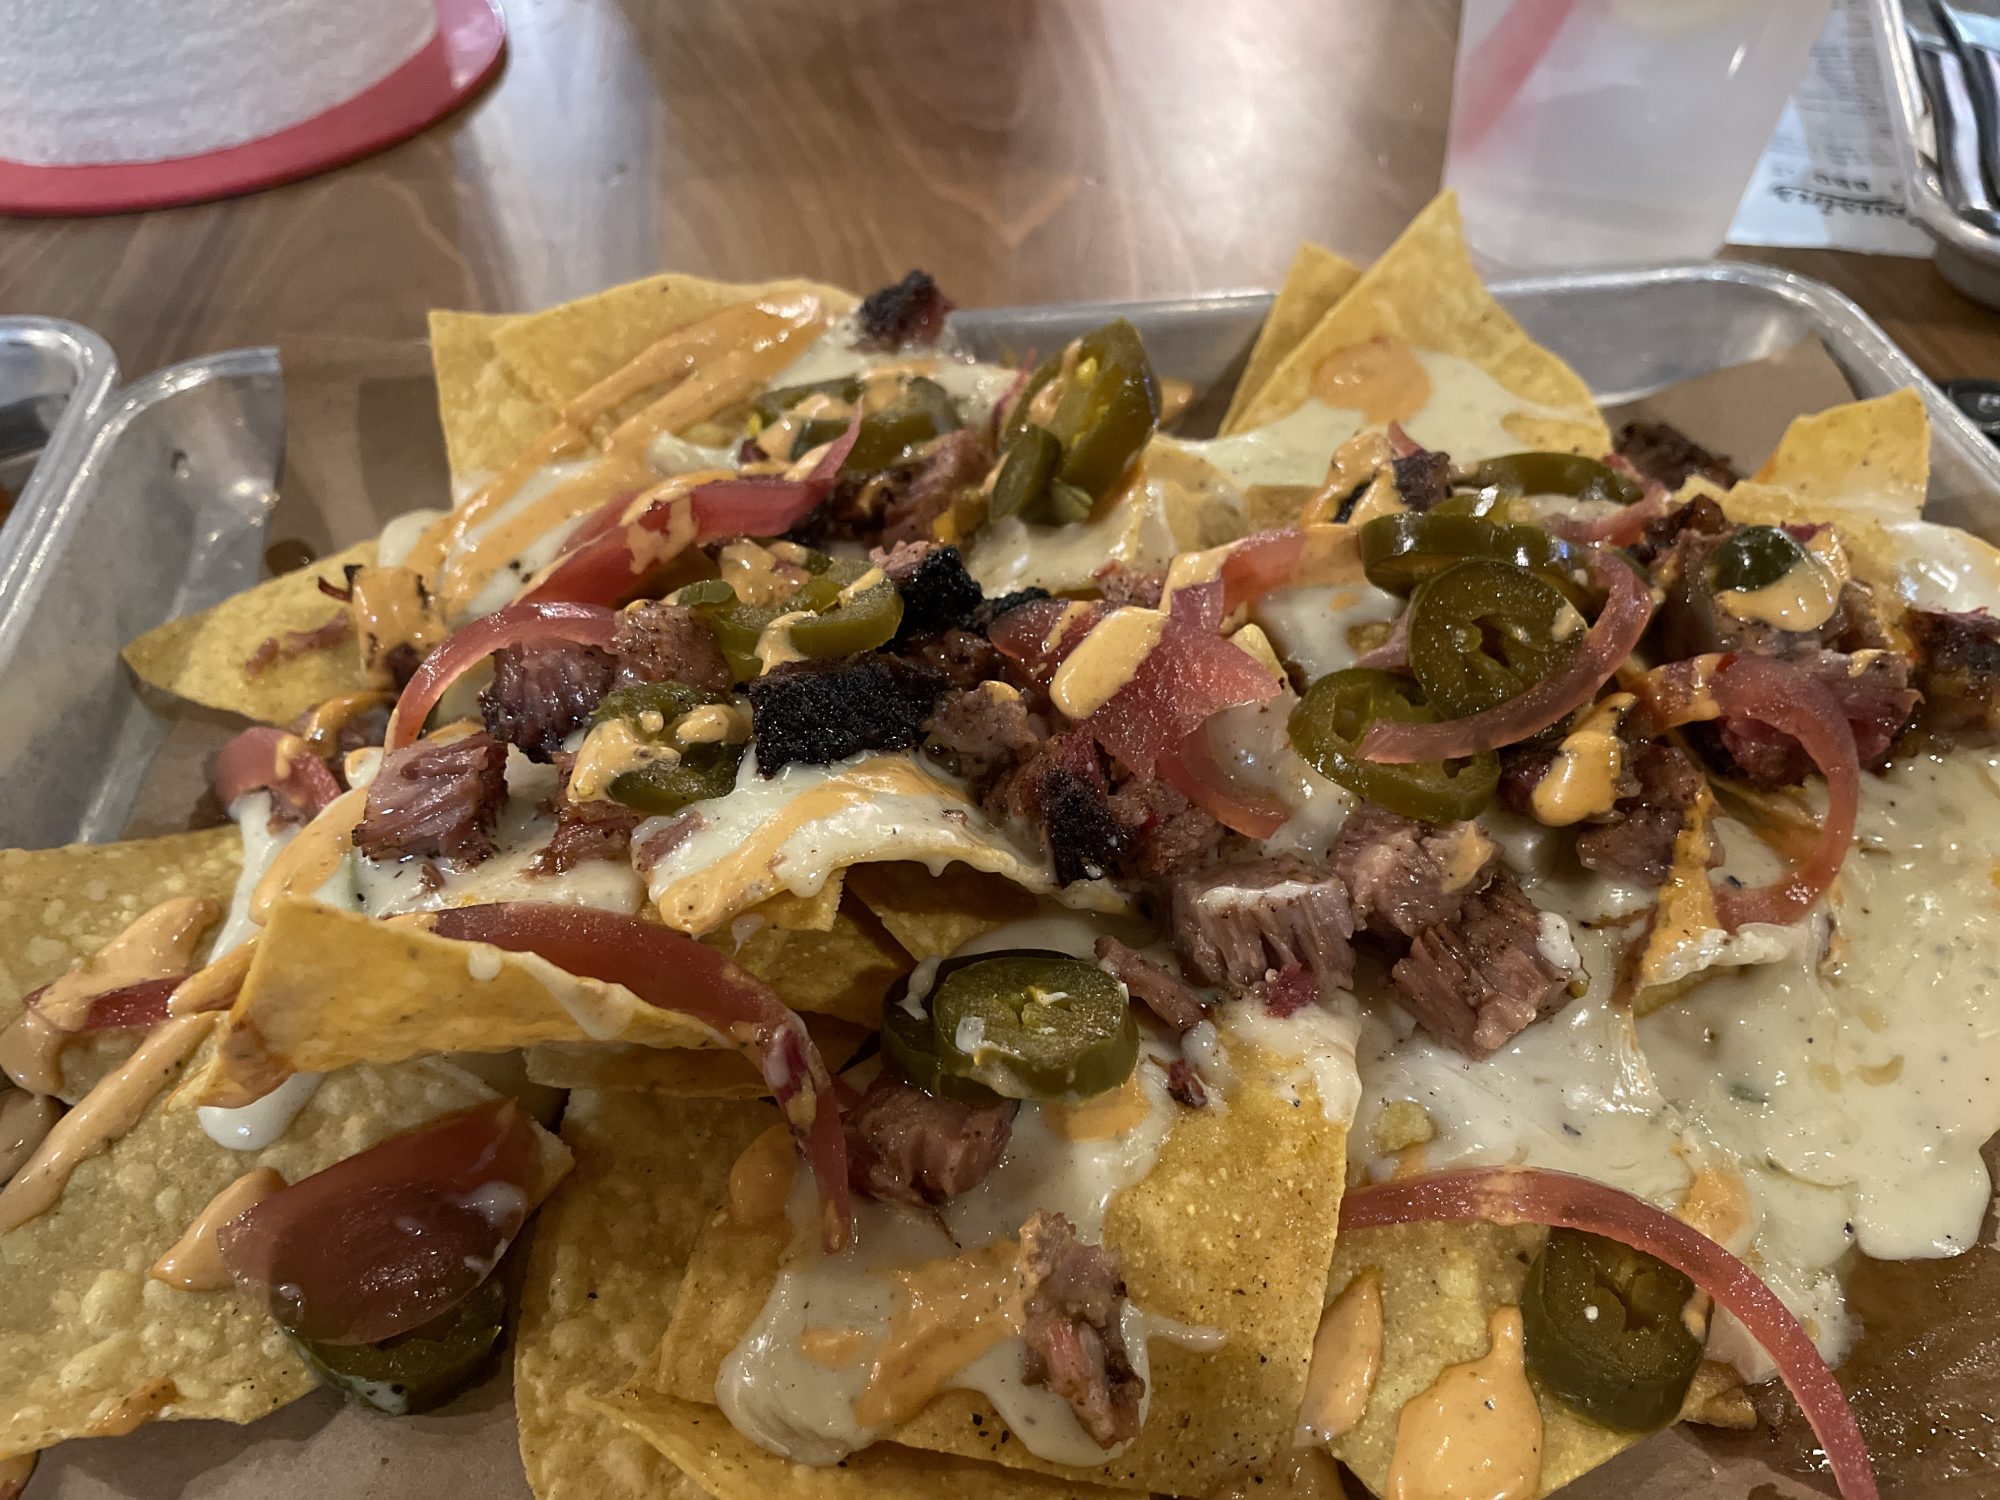 Cousins Brisket NachosCousins Fort Worth Brisket Nachos. Big enough as a meal for two if you’re watching calories.